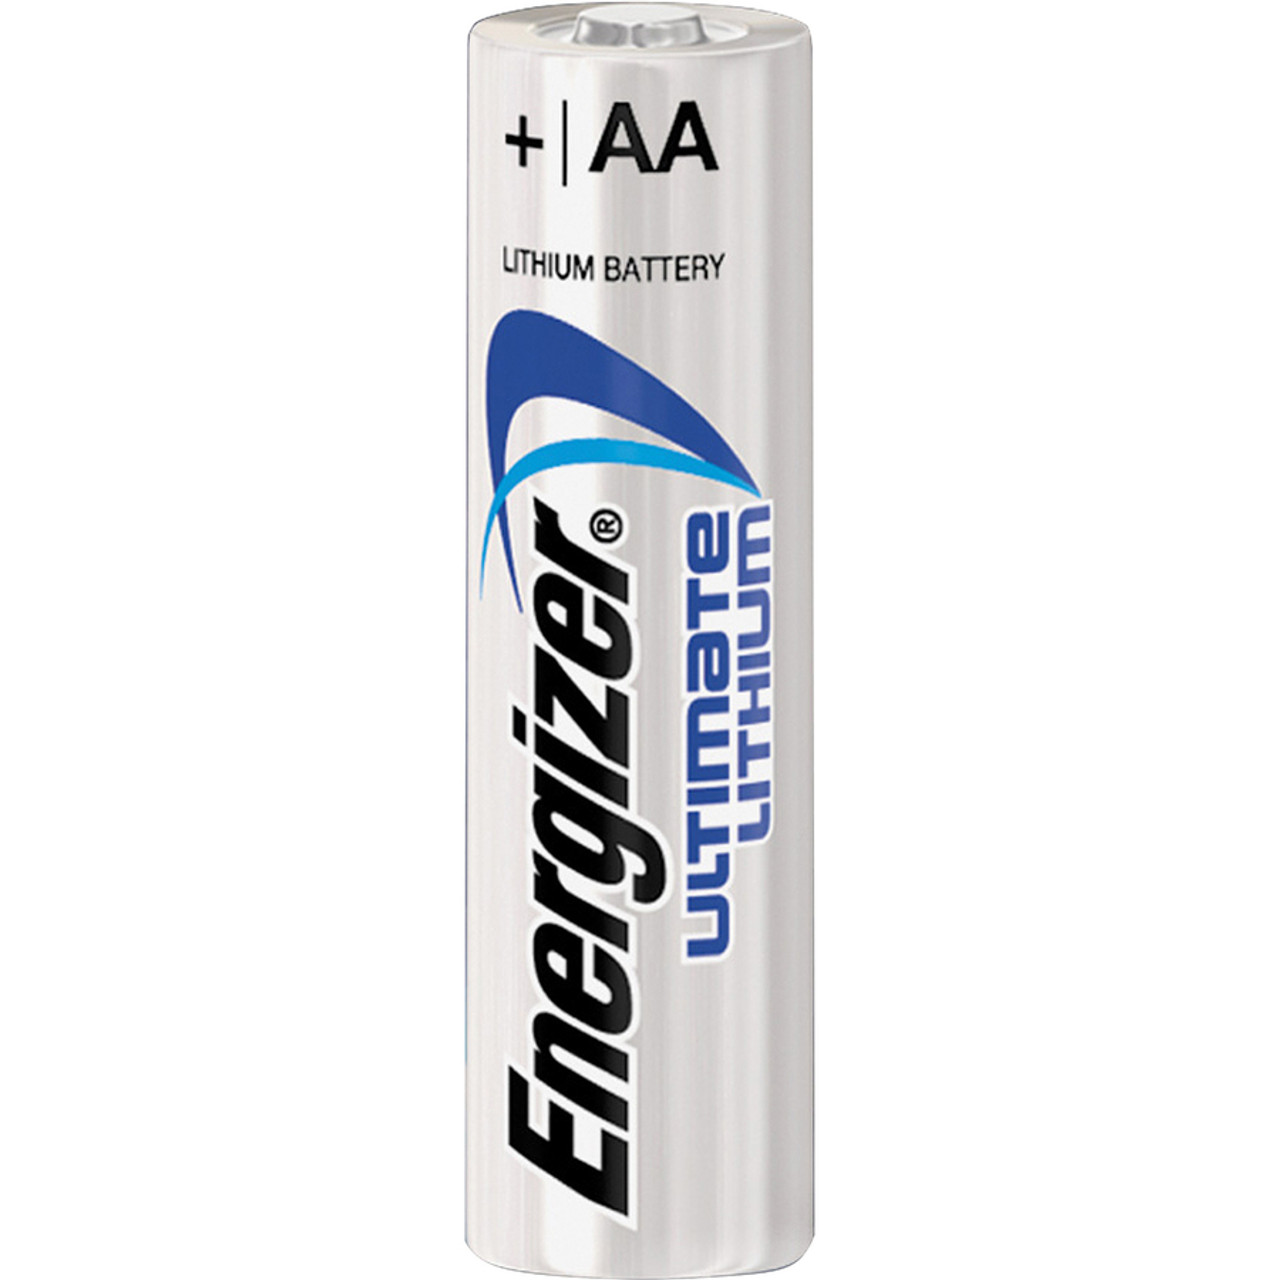 Energizer® AA Ultimate Lithium Battery, 1.5 Volt - DDP Medical Supply